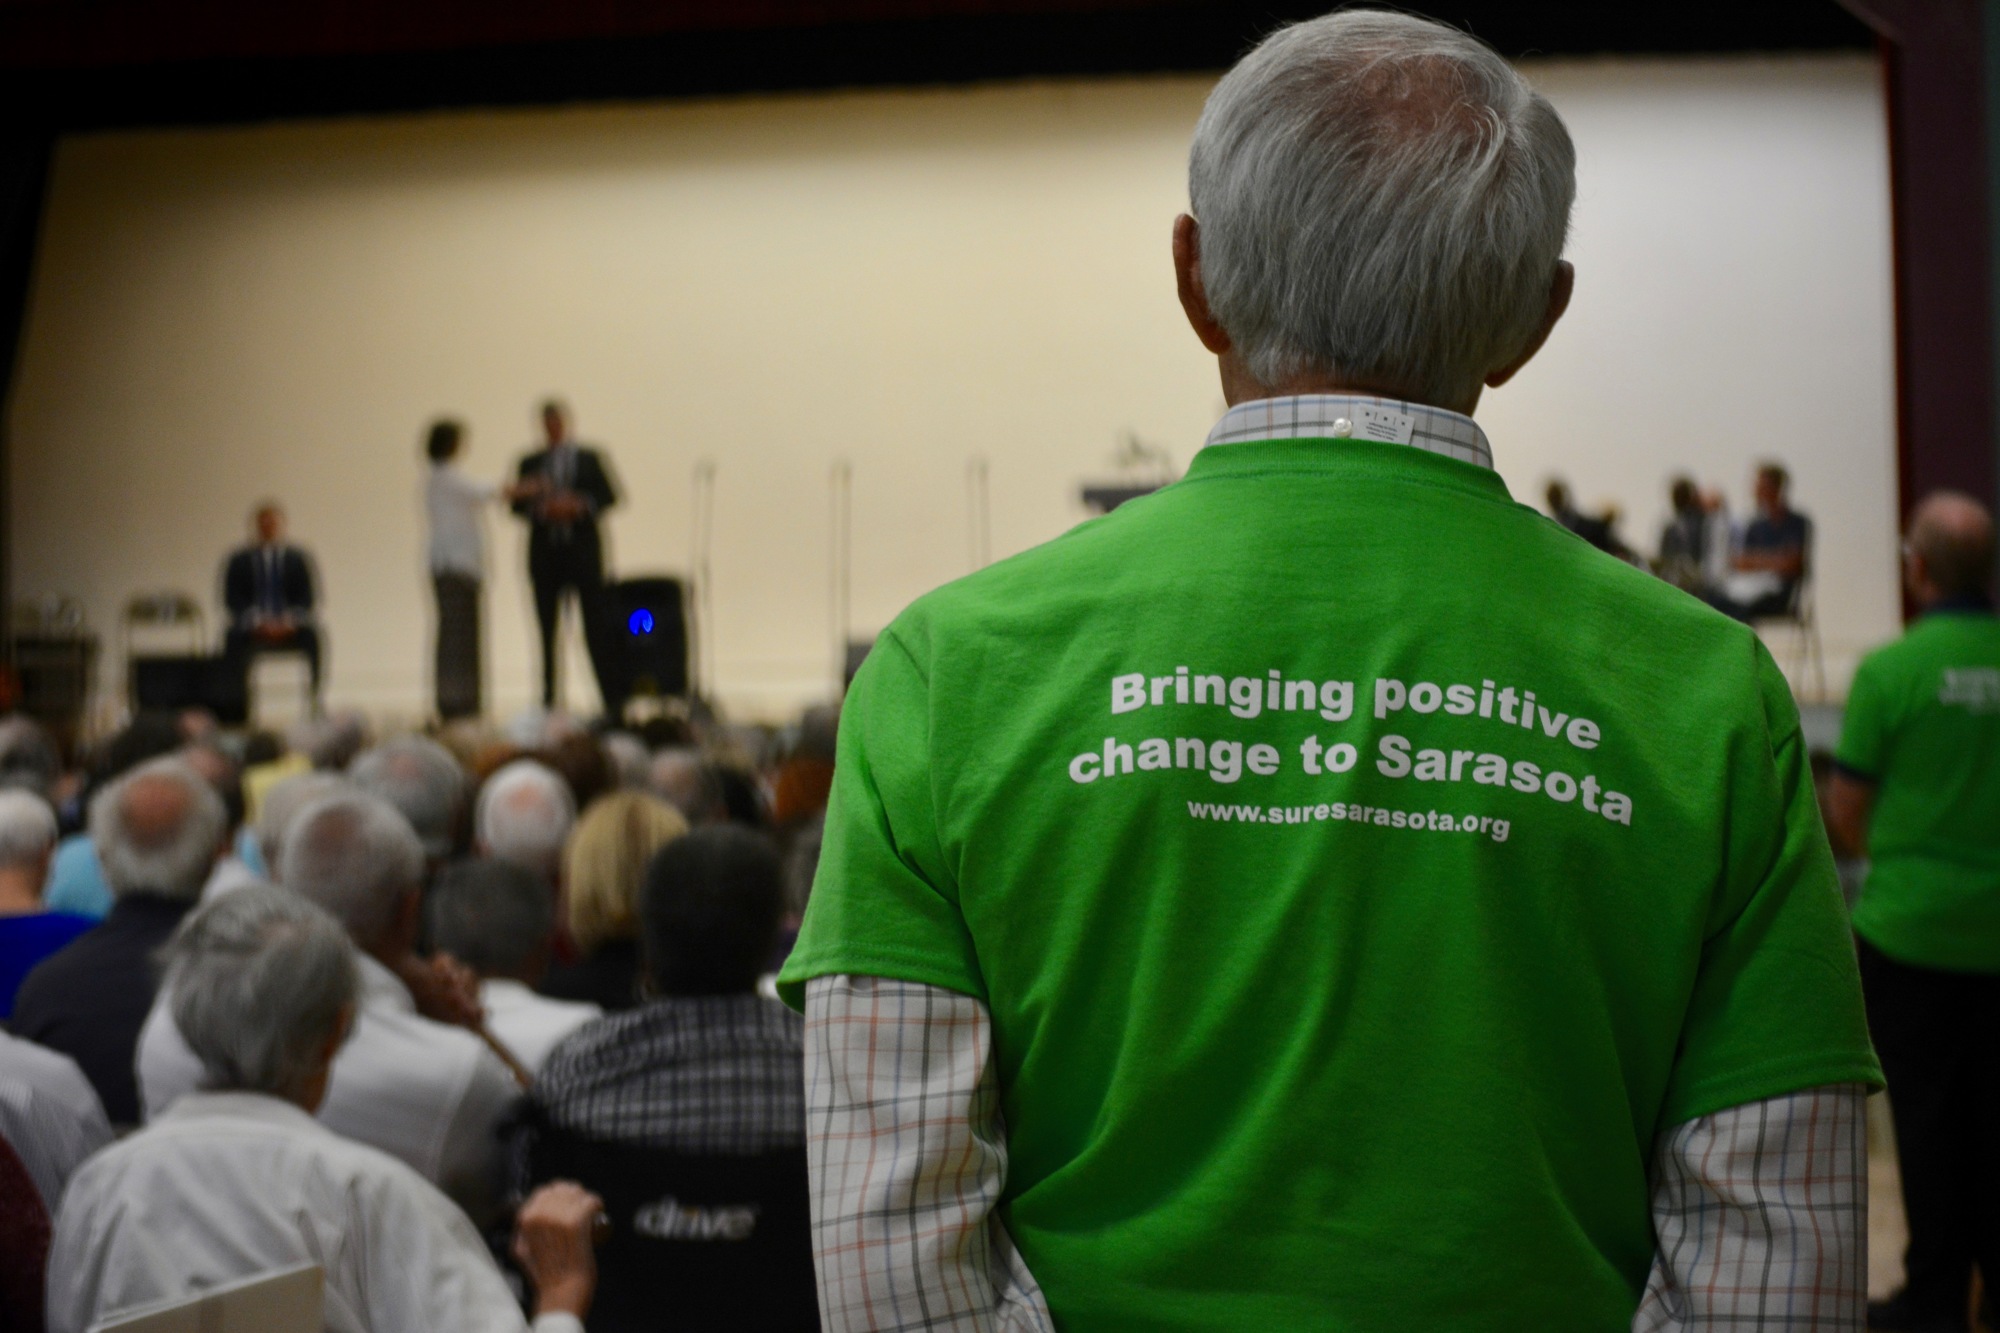 Earlier this year, SURE members attended a meeting at the Sarasota Municipal Auditorium where the organization discussed strategies for pursuing tangible solutions to issues like affordable housing.